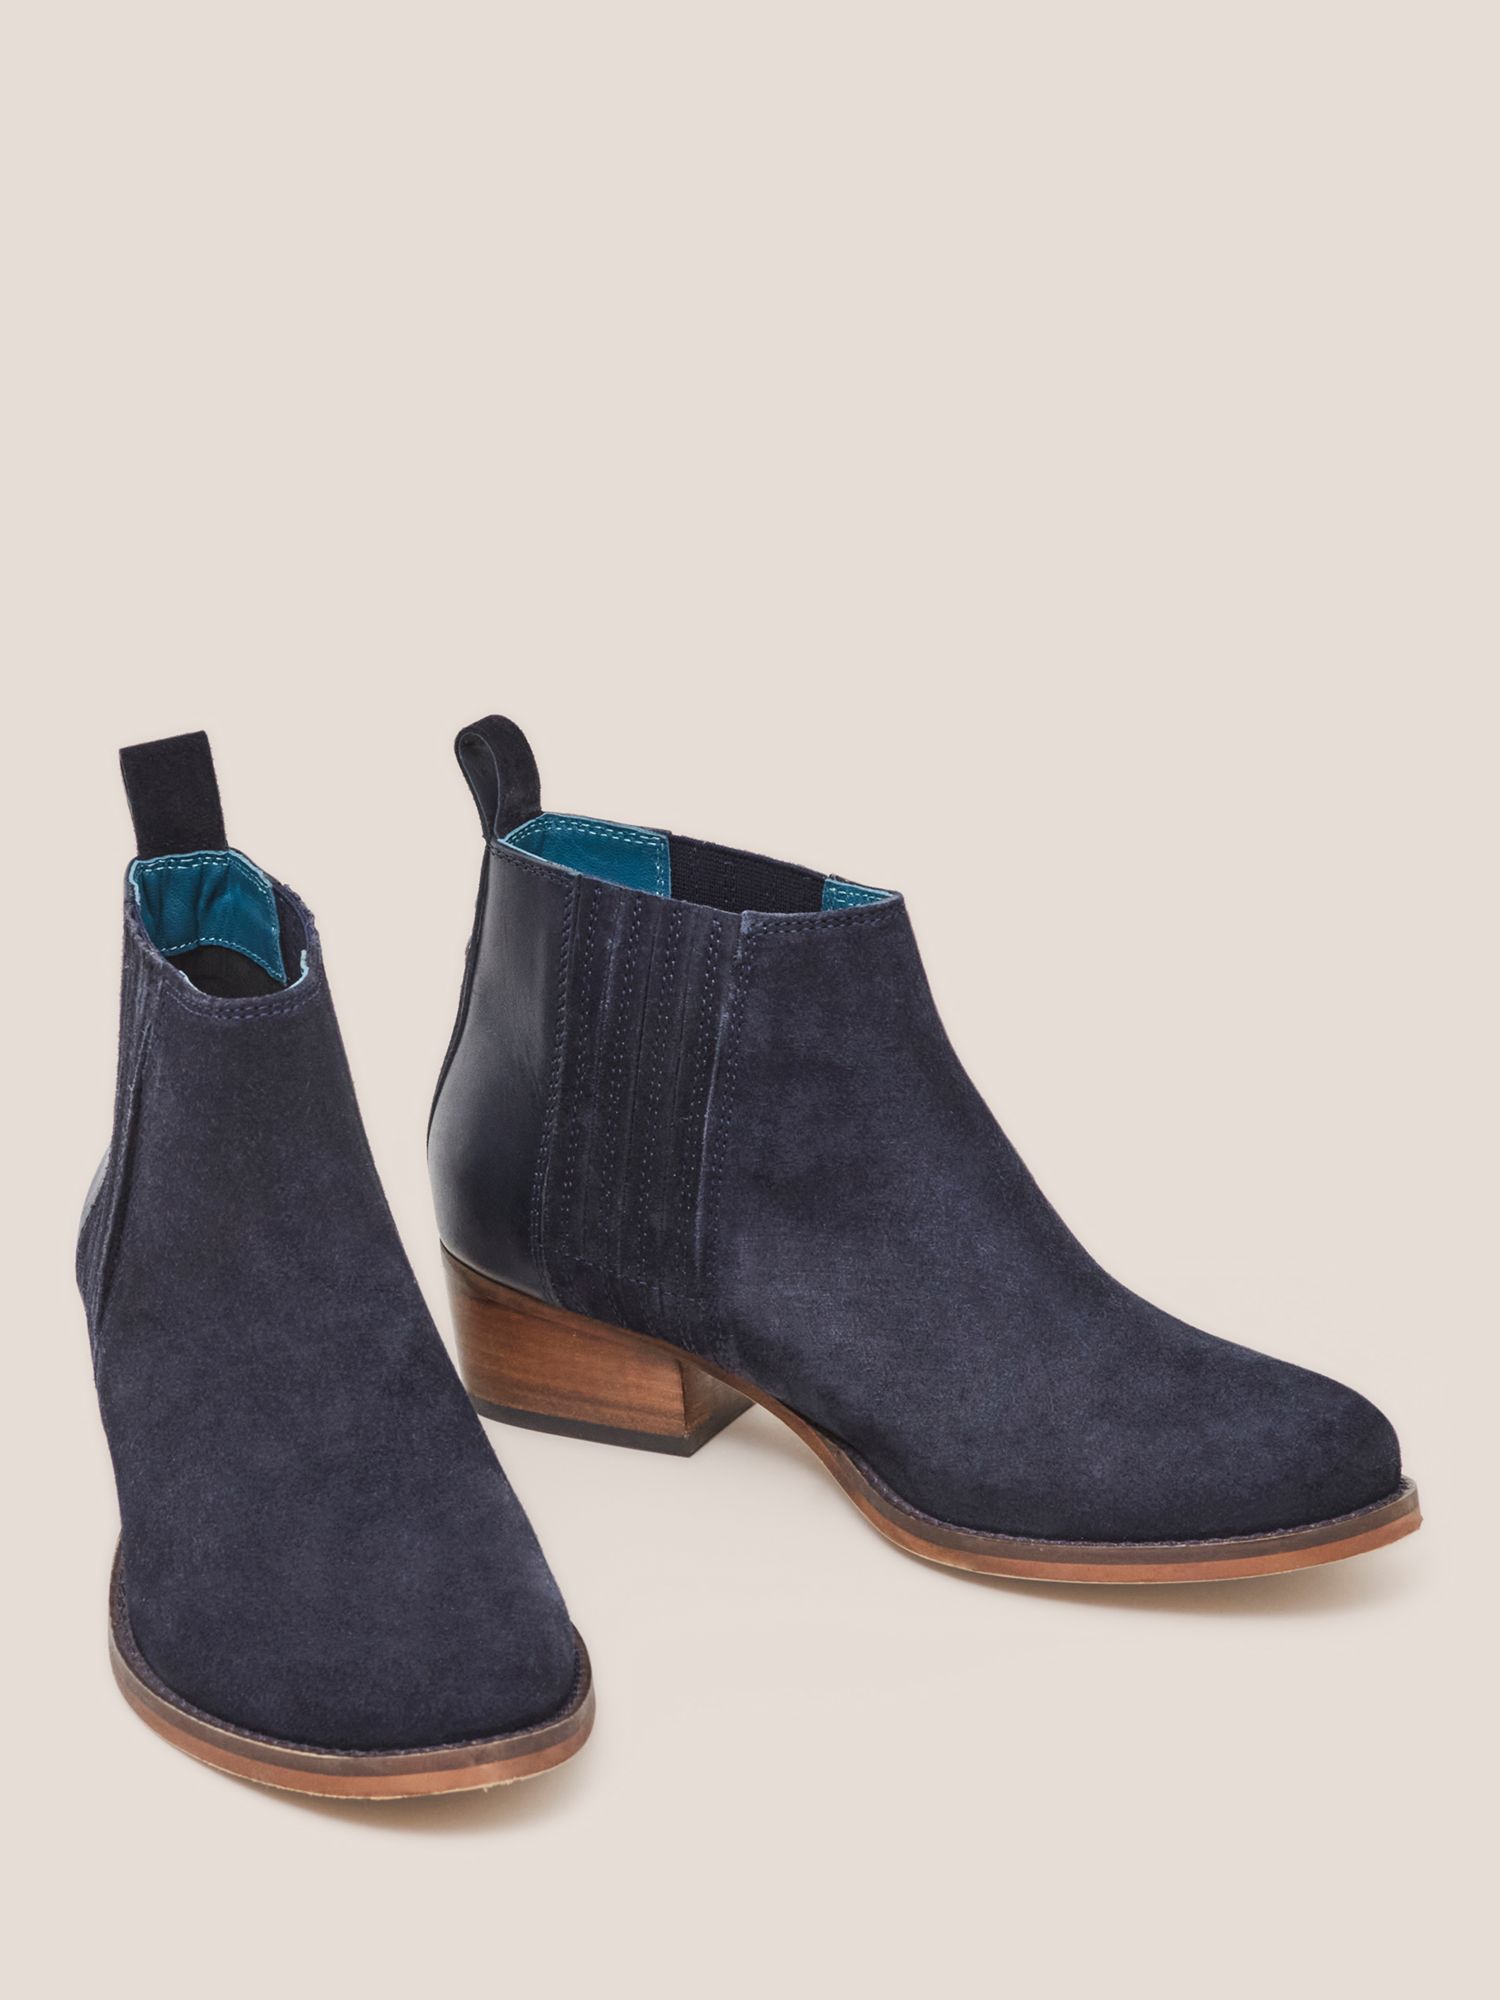 White Stuff Winona Suede Ankle Boots, Navy at John Lewis & Partners